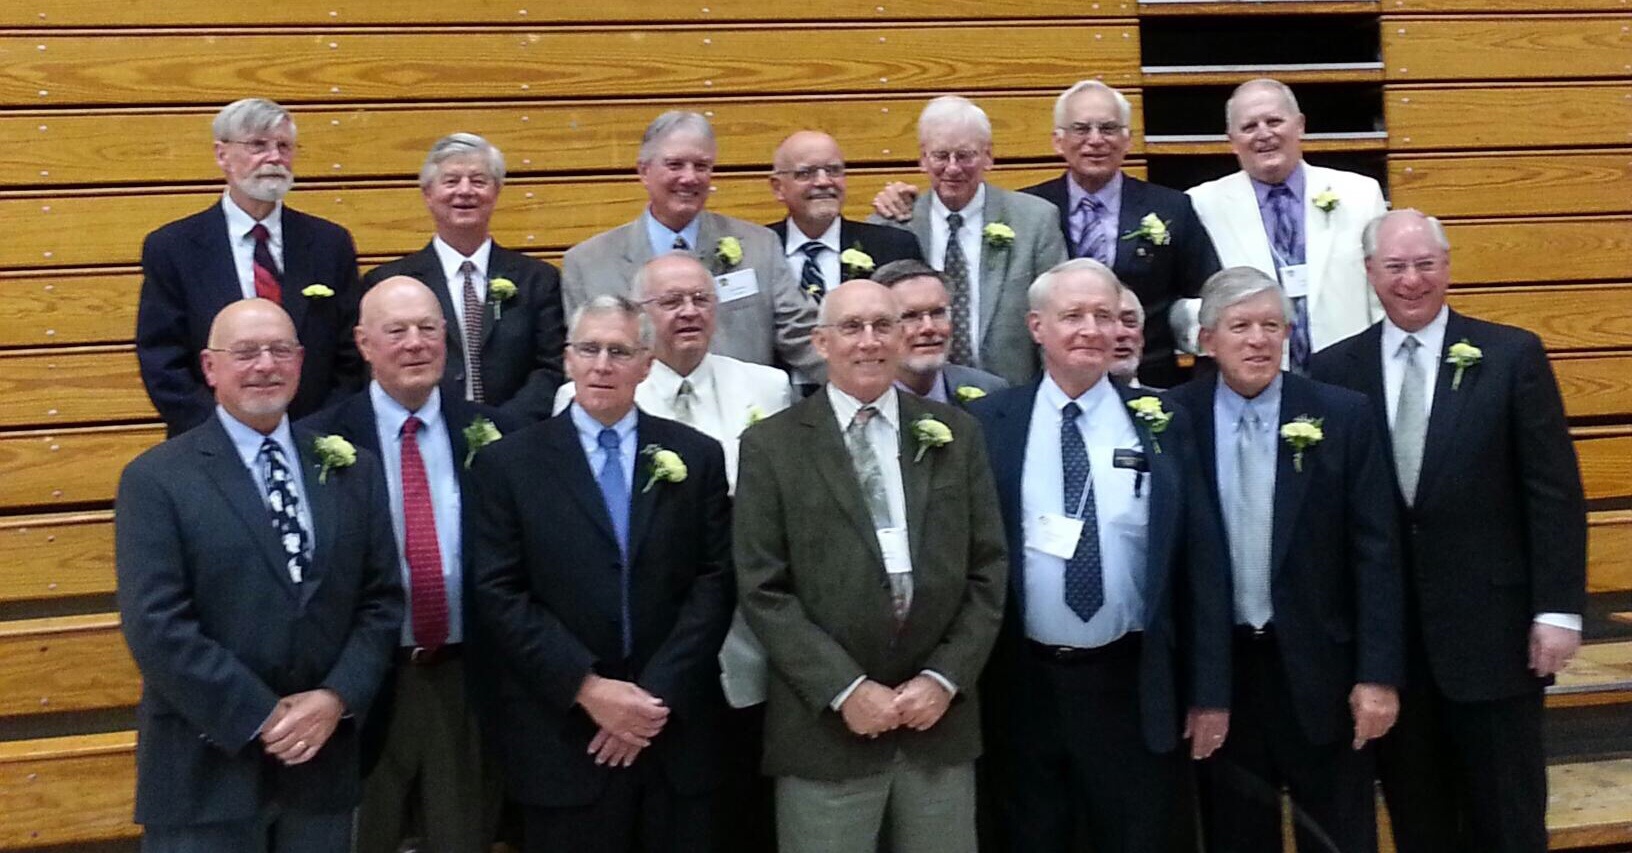 ADX Founding Fathers at the 50-Year Reunion